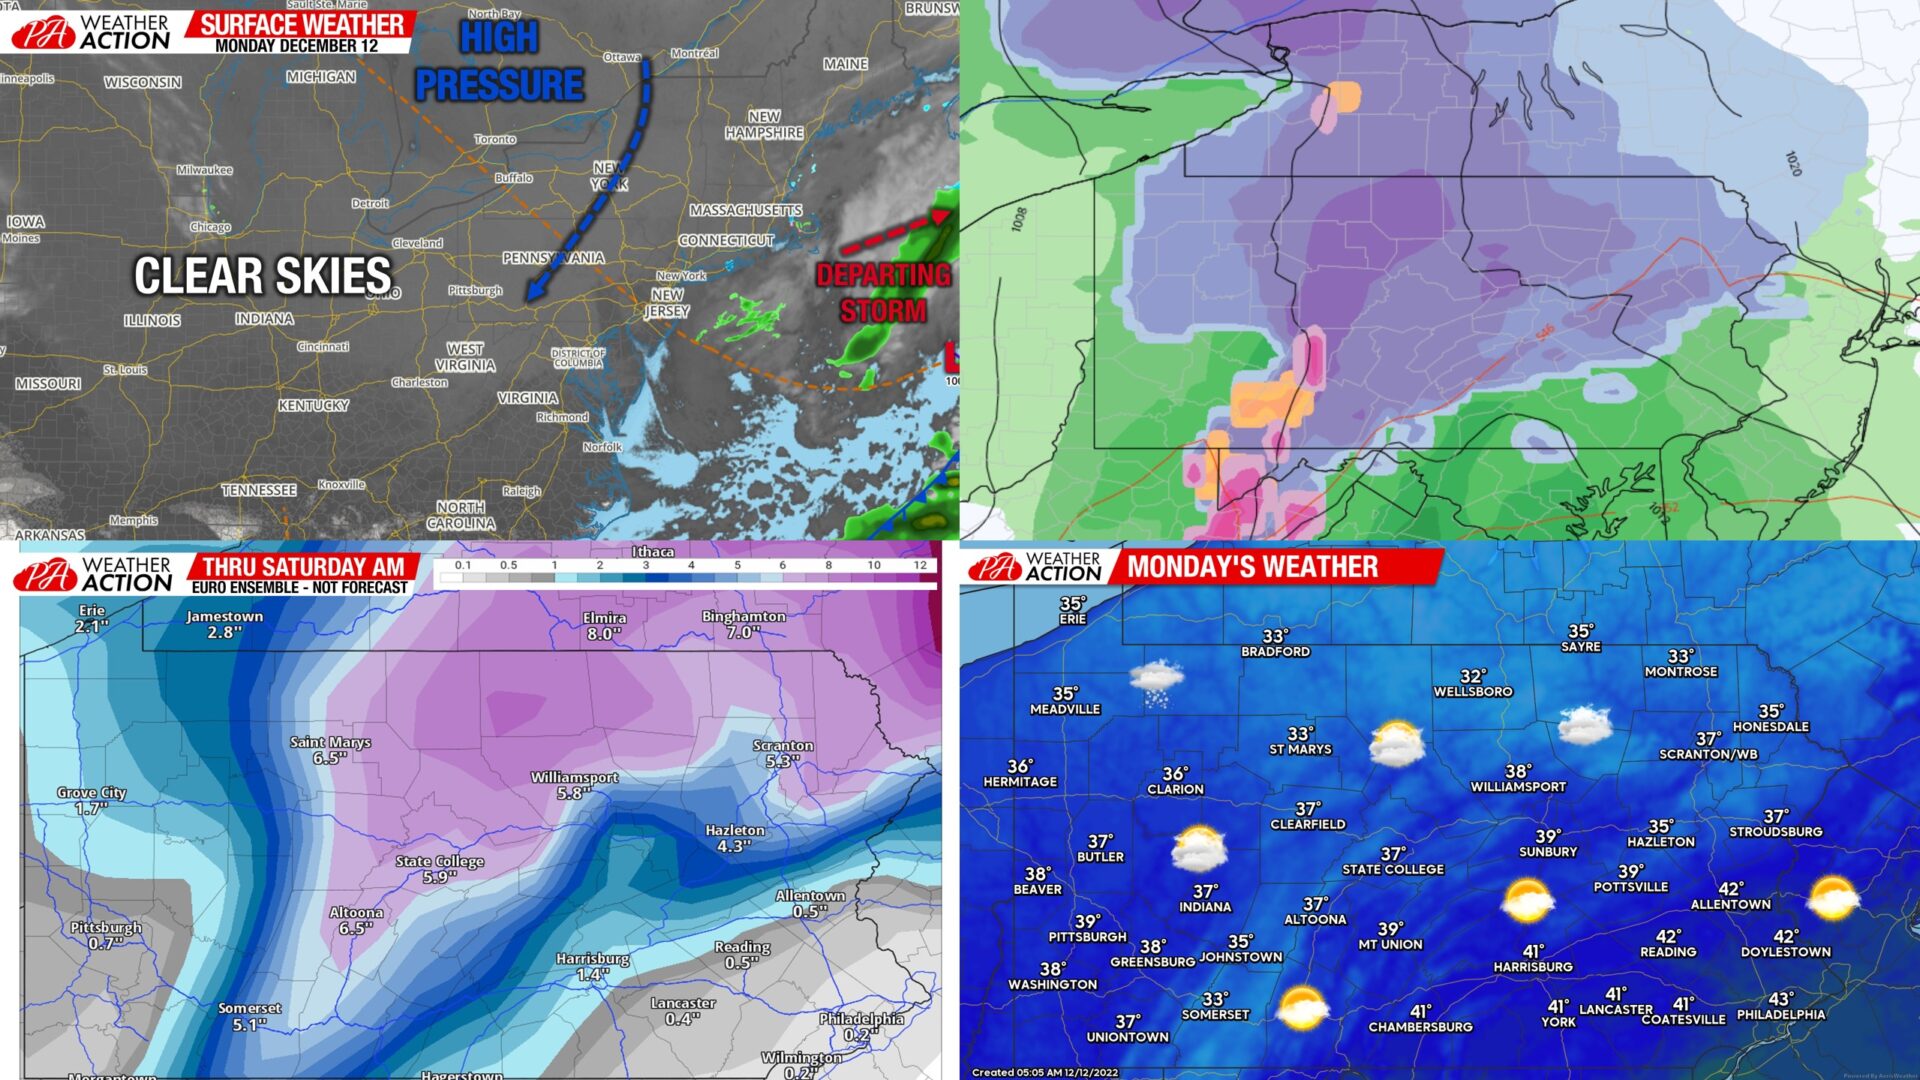 Monday December 12 Report: Cold & Clear Start to Week Before Messy Storm Thursday – Friday